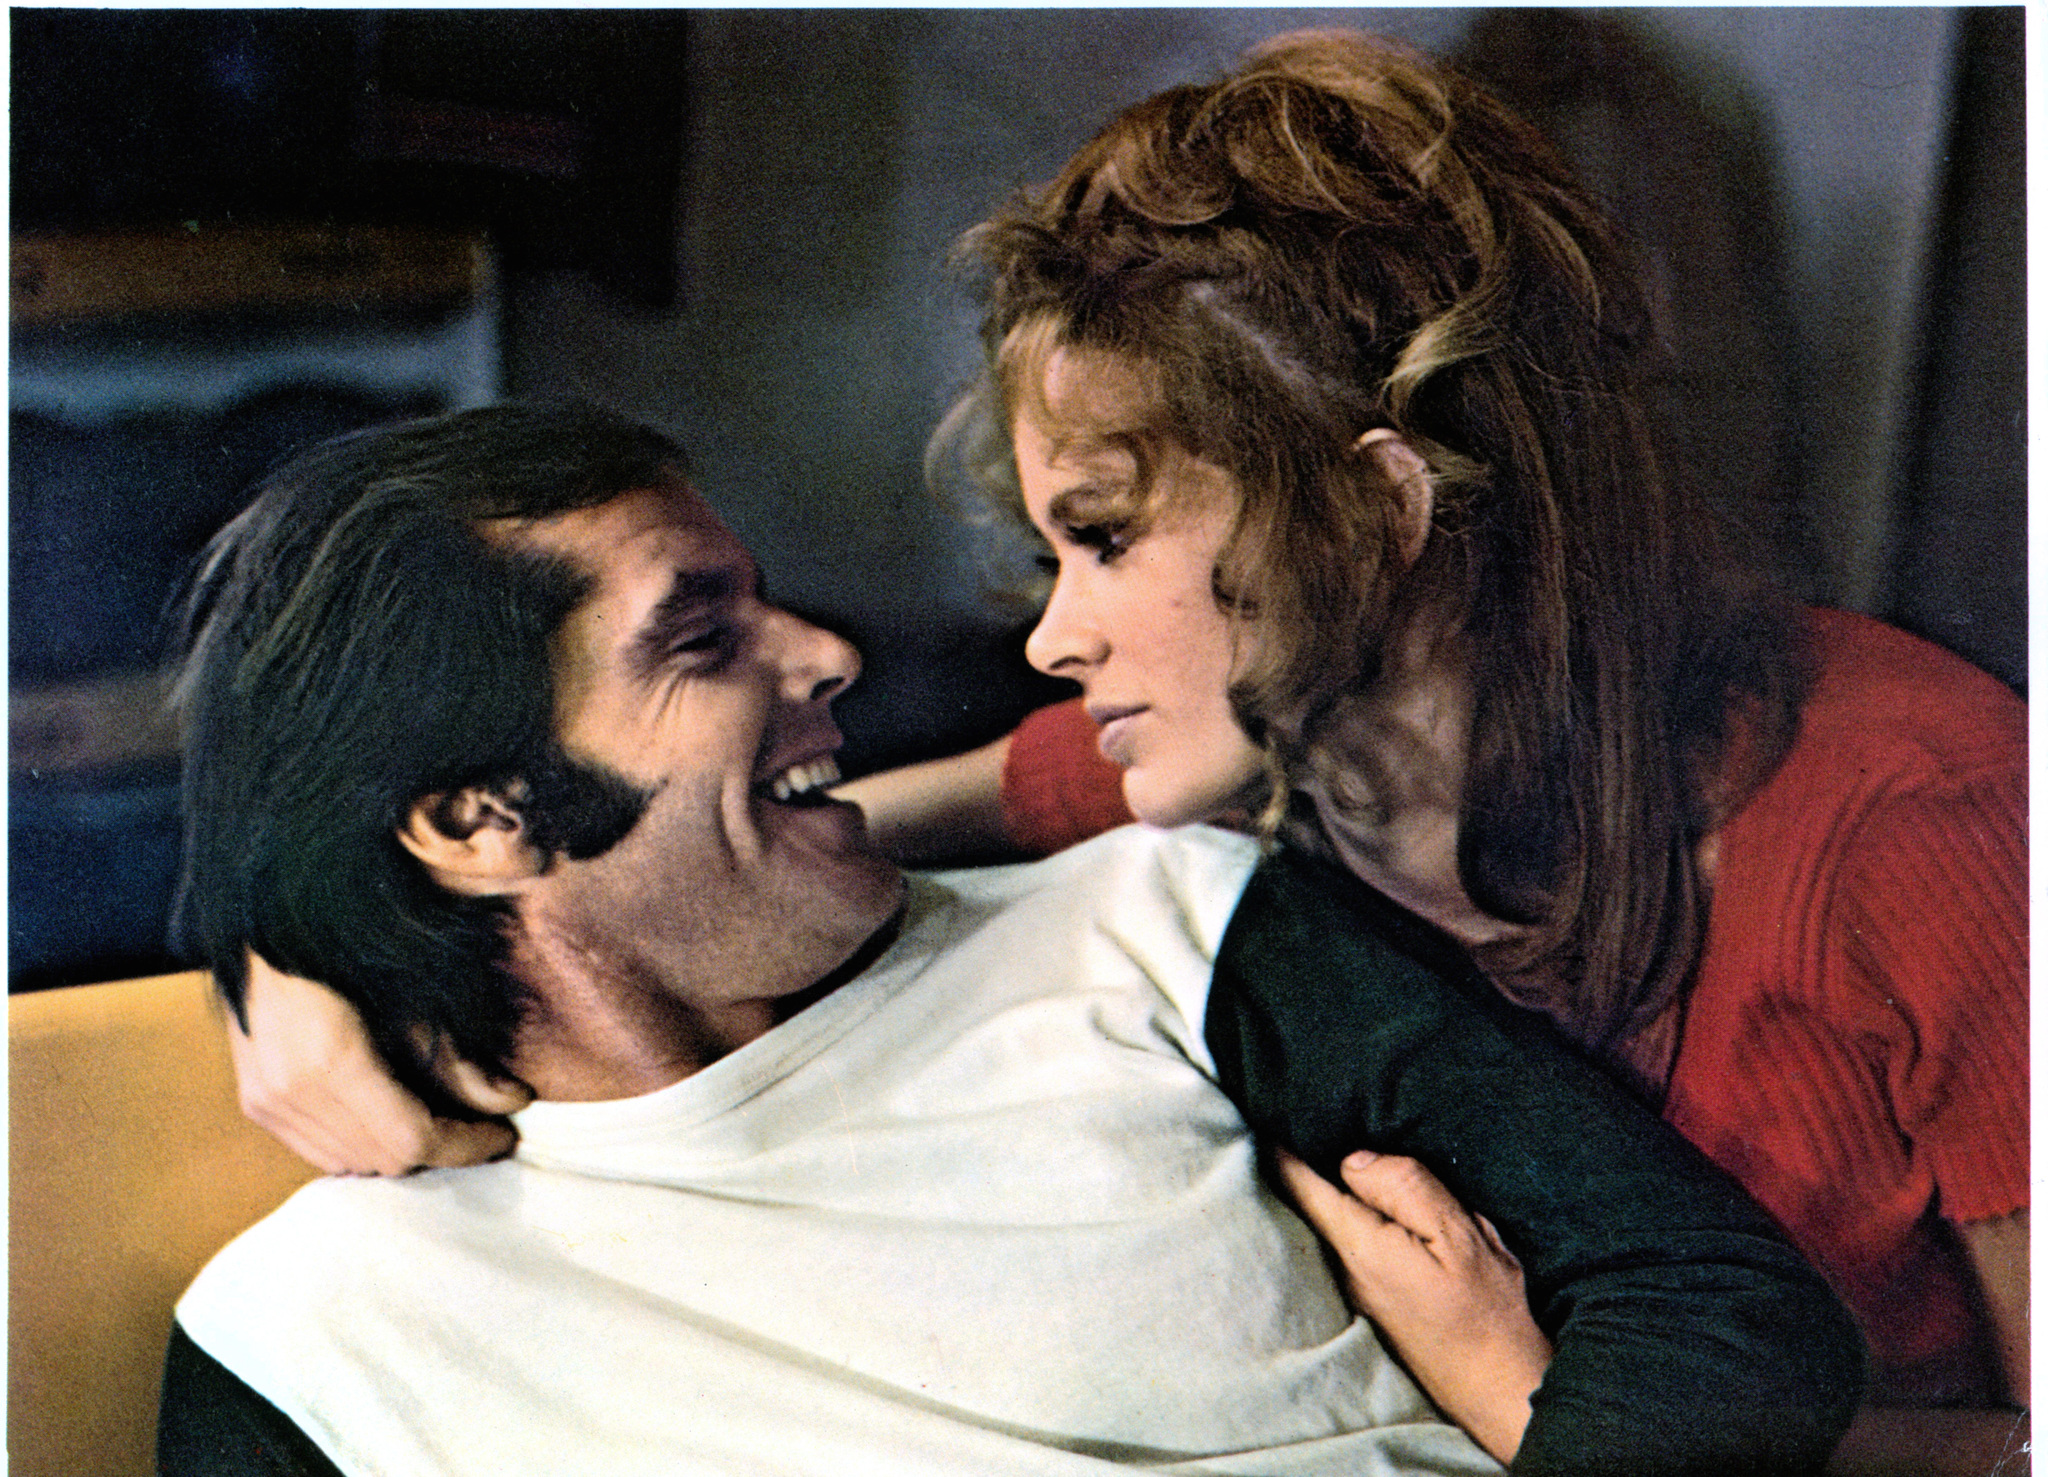 Jack Nicholson and Karen Black at event of Five Easy Pieces (1970)